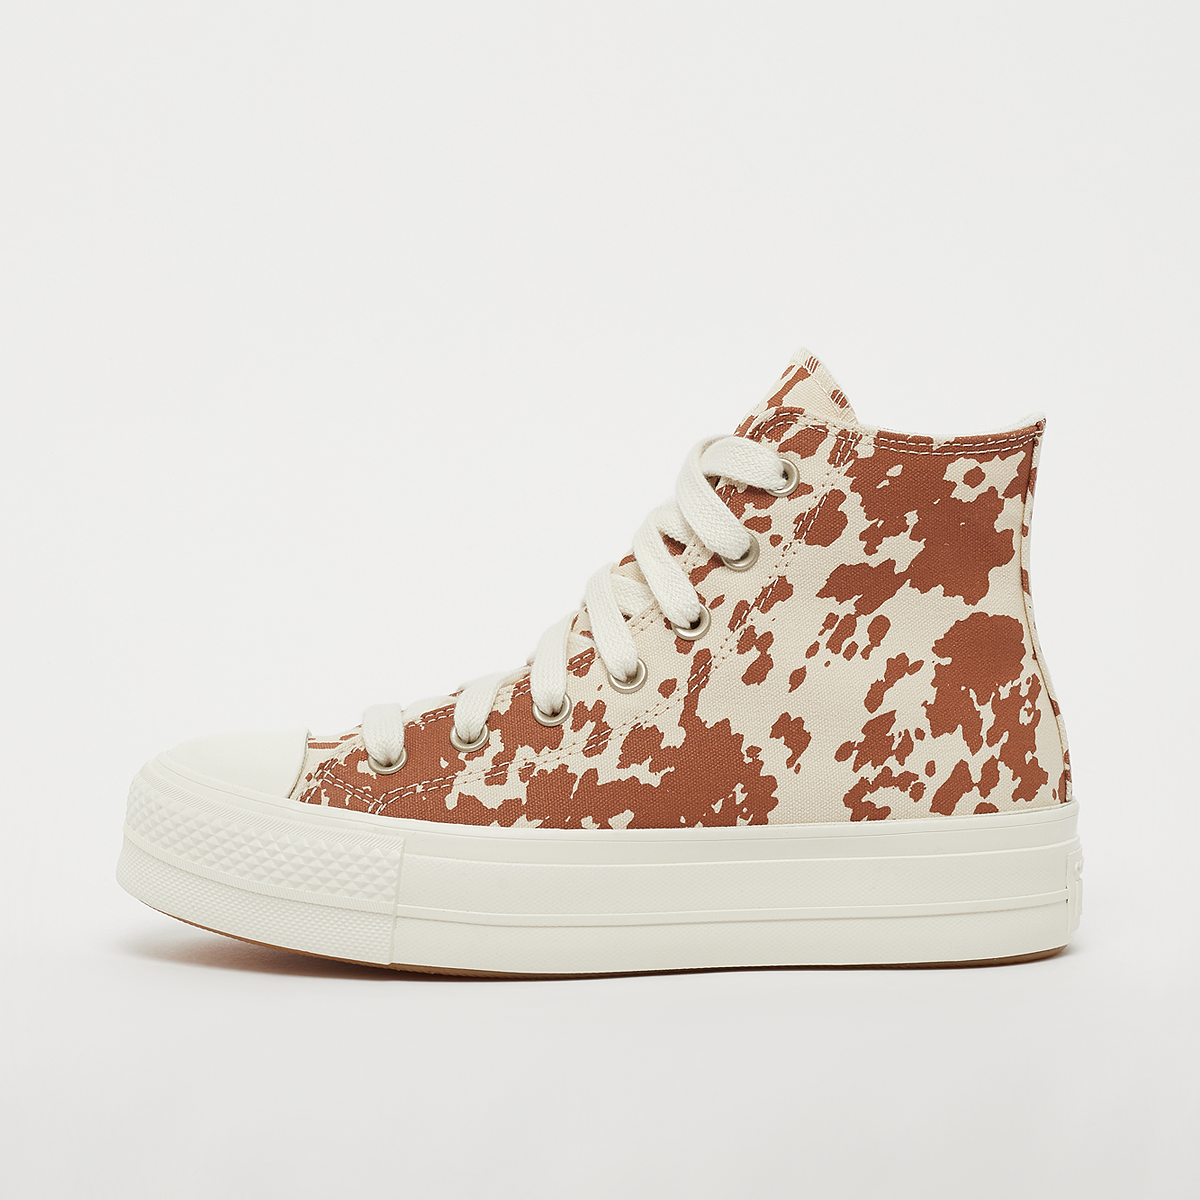 Chuck Taylor All Star Lift egret/brown/gold, Converse, Footwear, egret/brown/gold, taille: 36.5